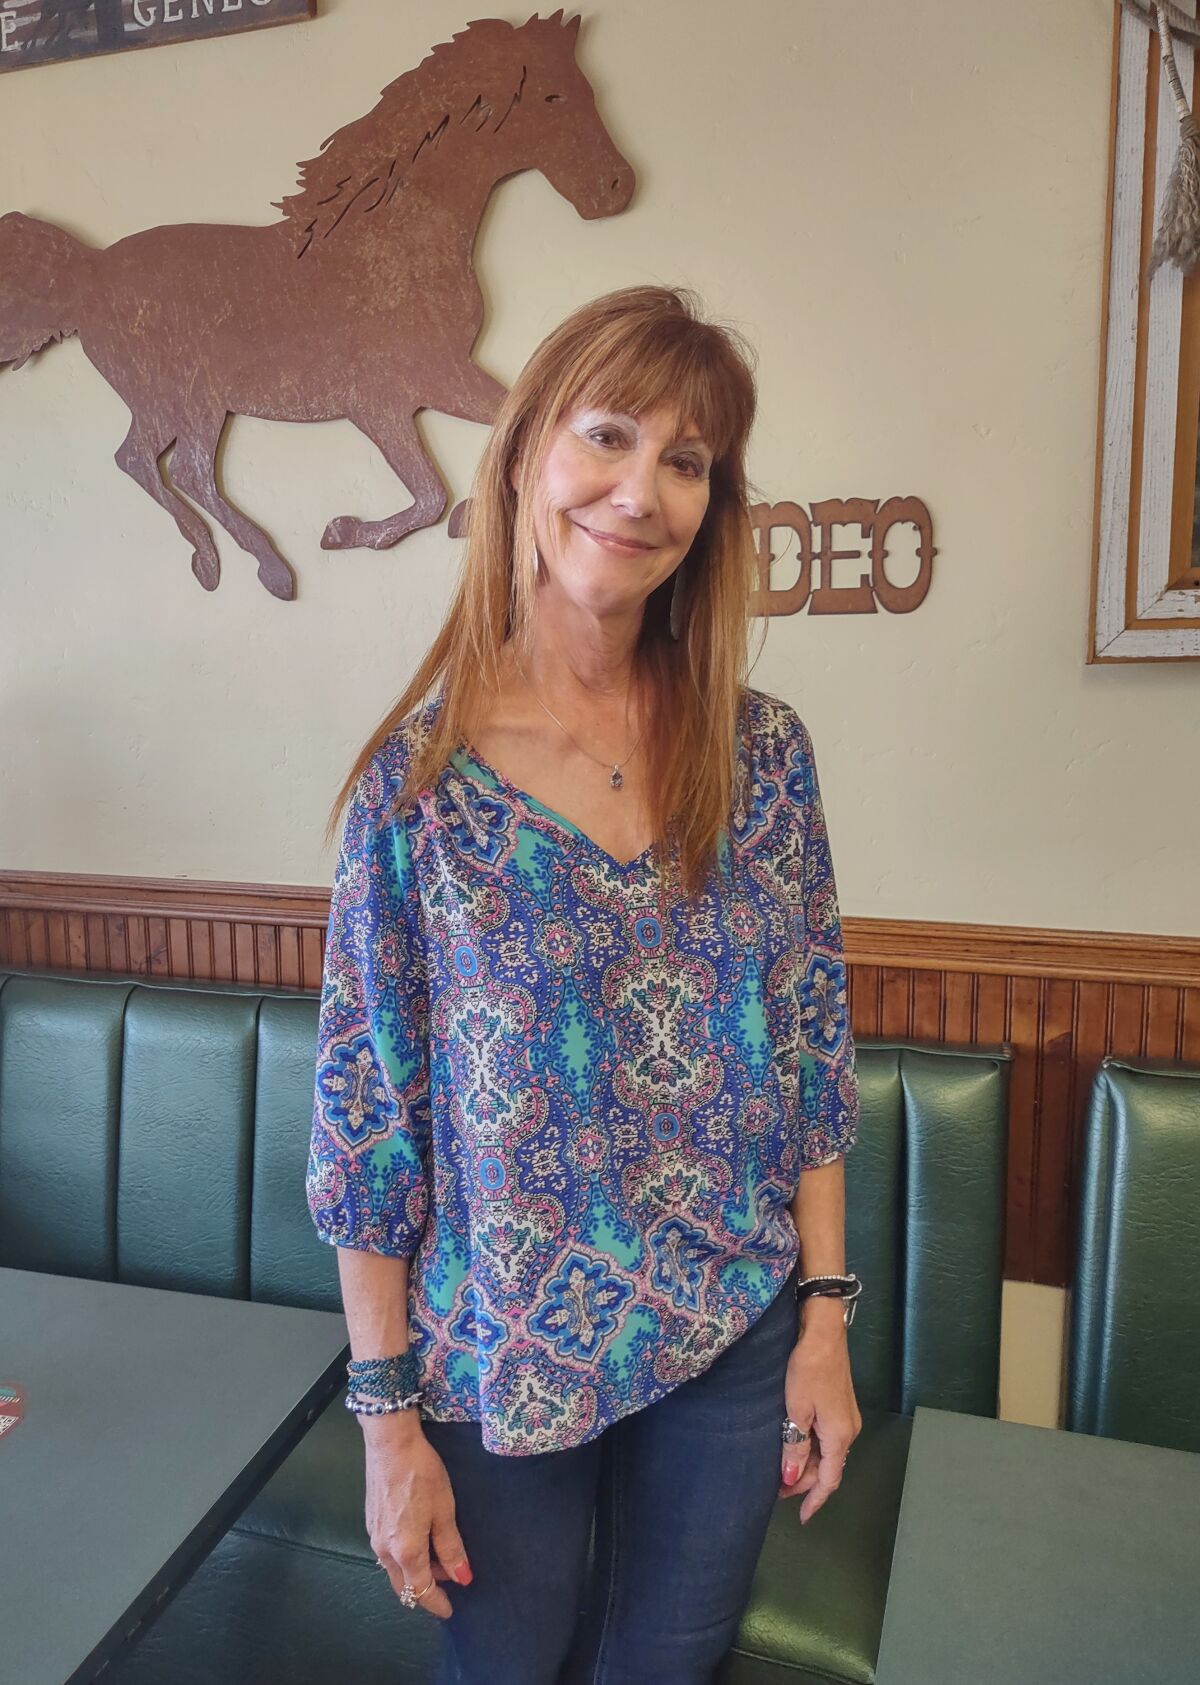 Ramona Cafe owner Sonja Steiner says she will miss her staff and customers when she retires from the restaurant industry.